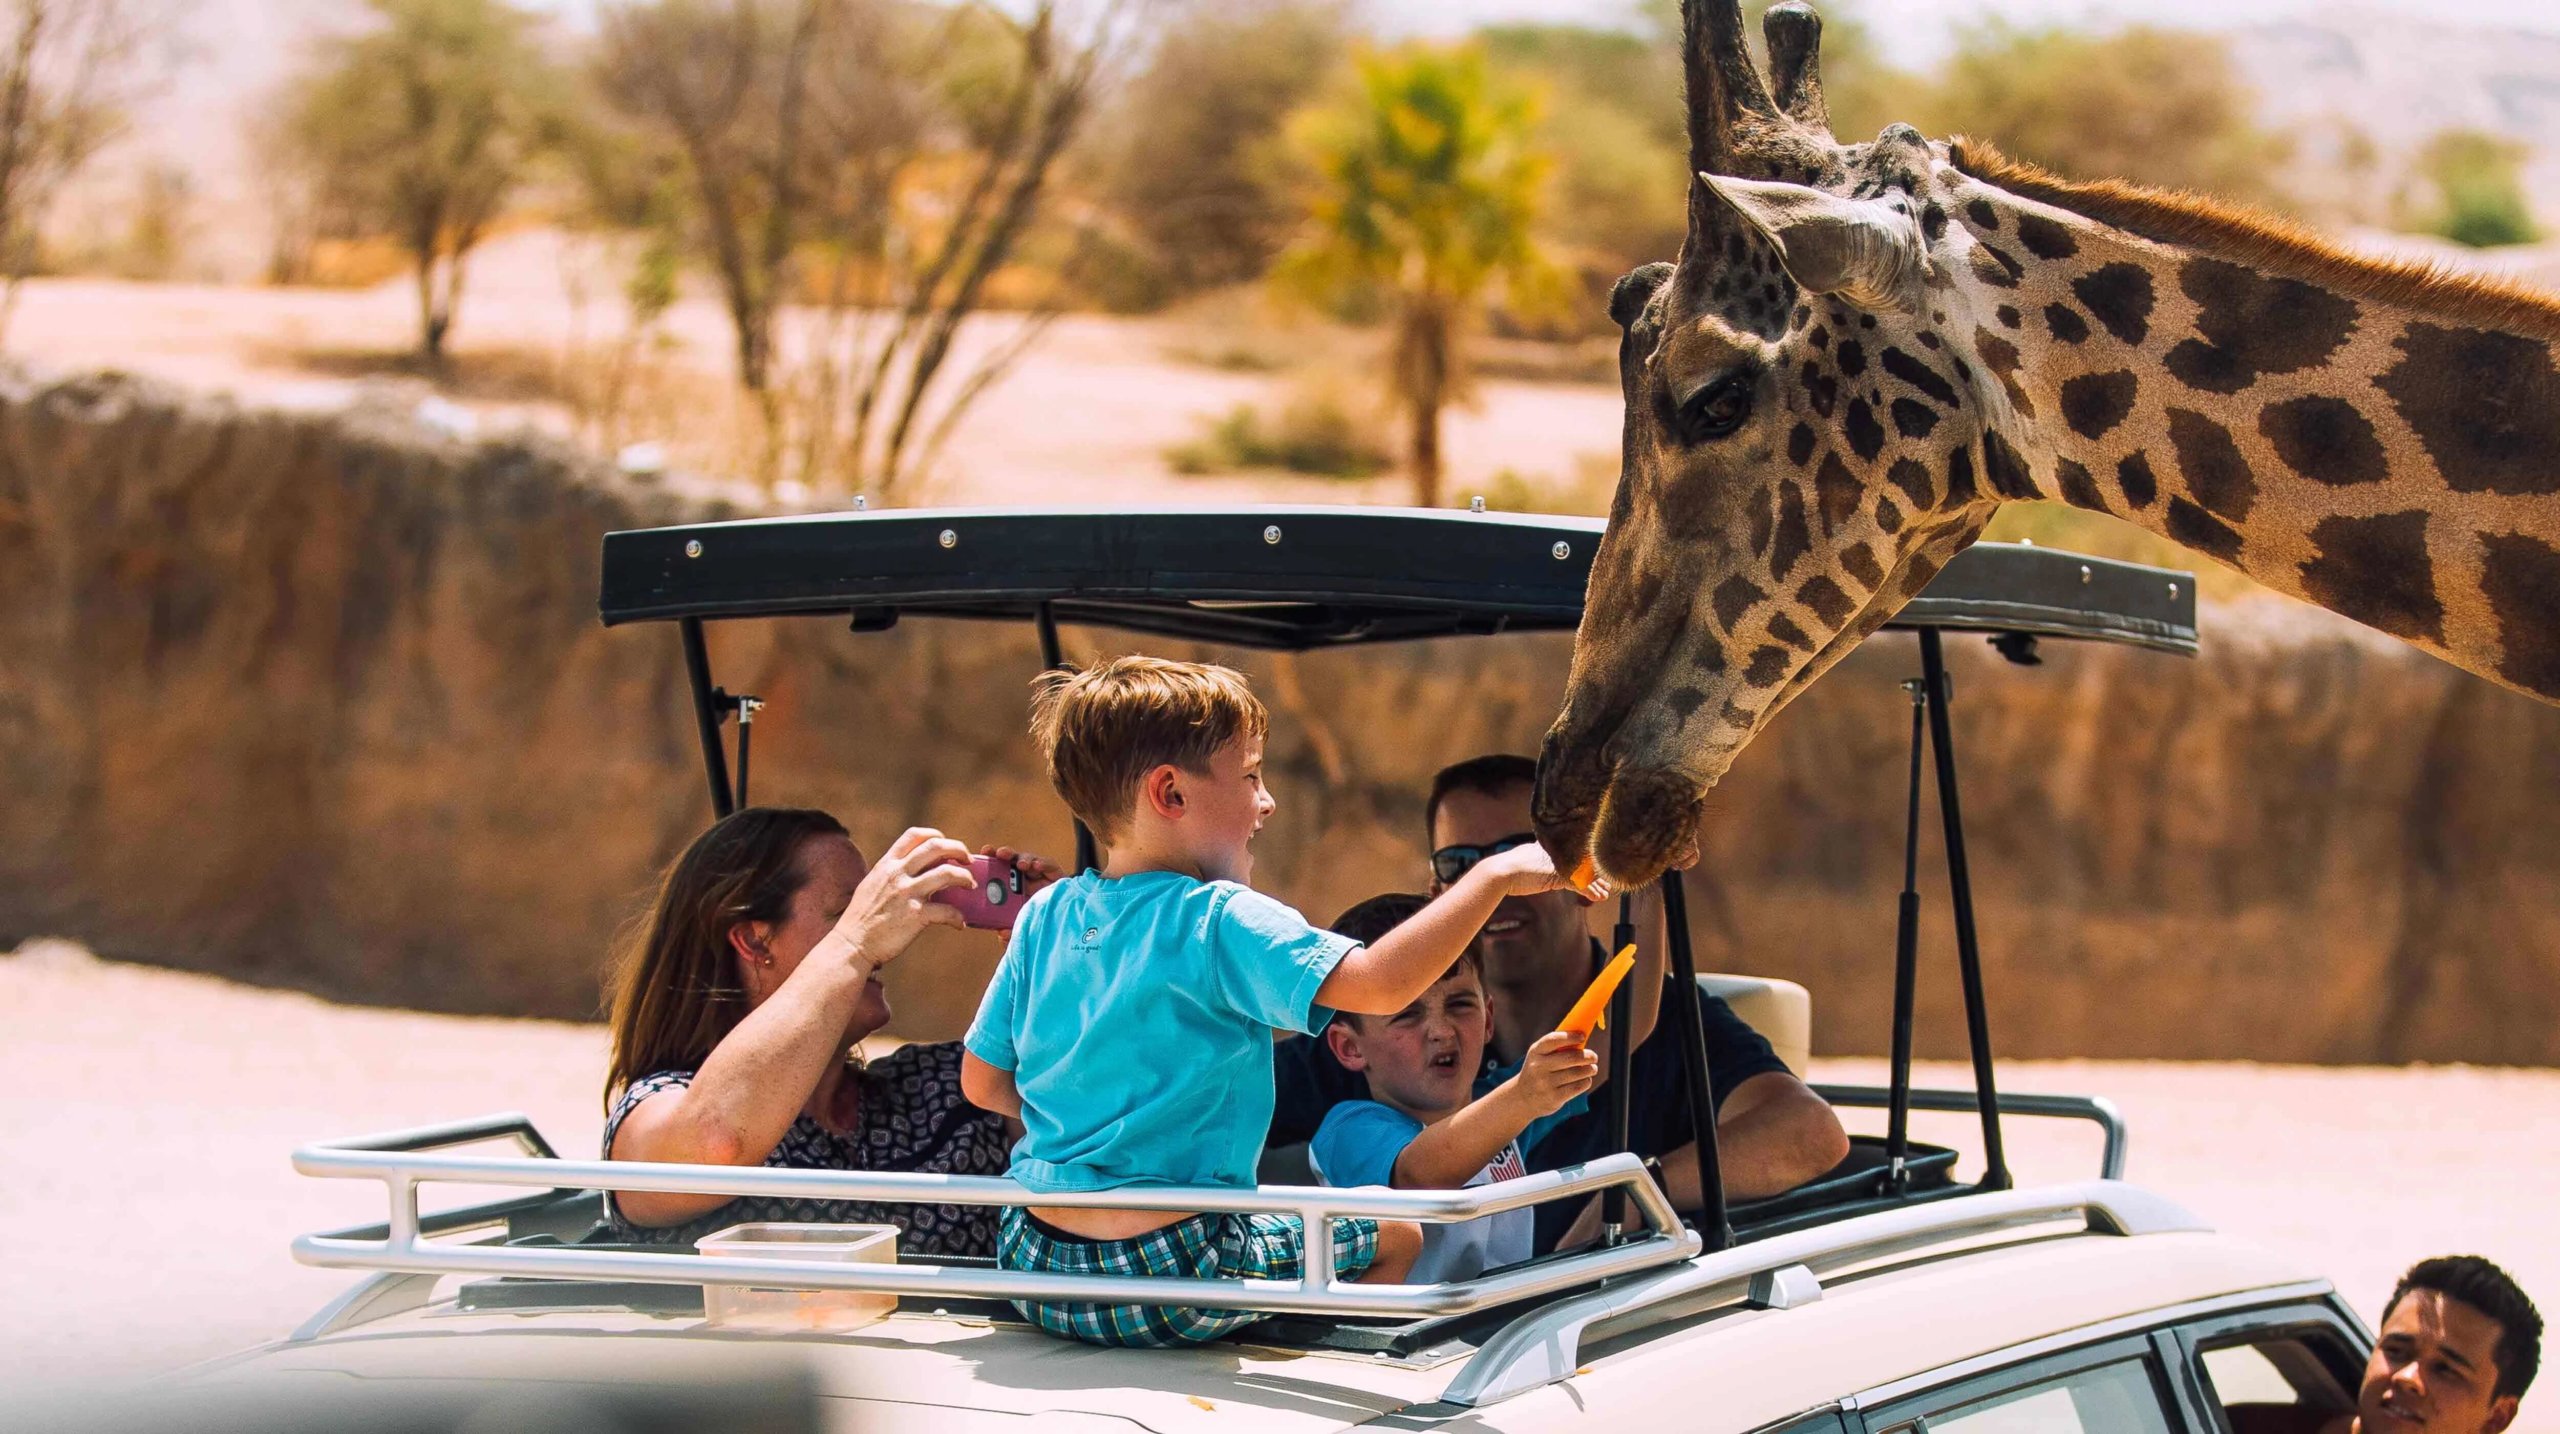 Everything About the Al Ain Zoo Safari